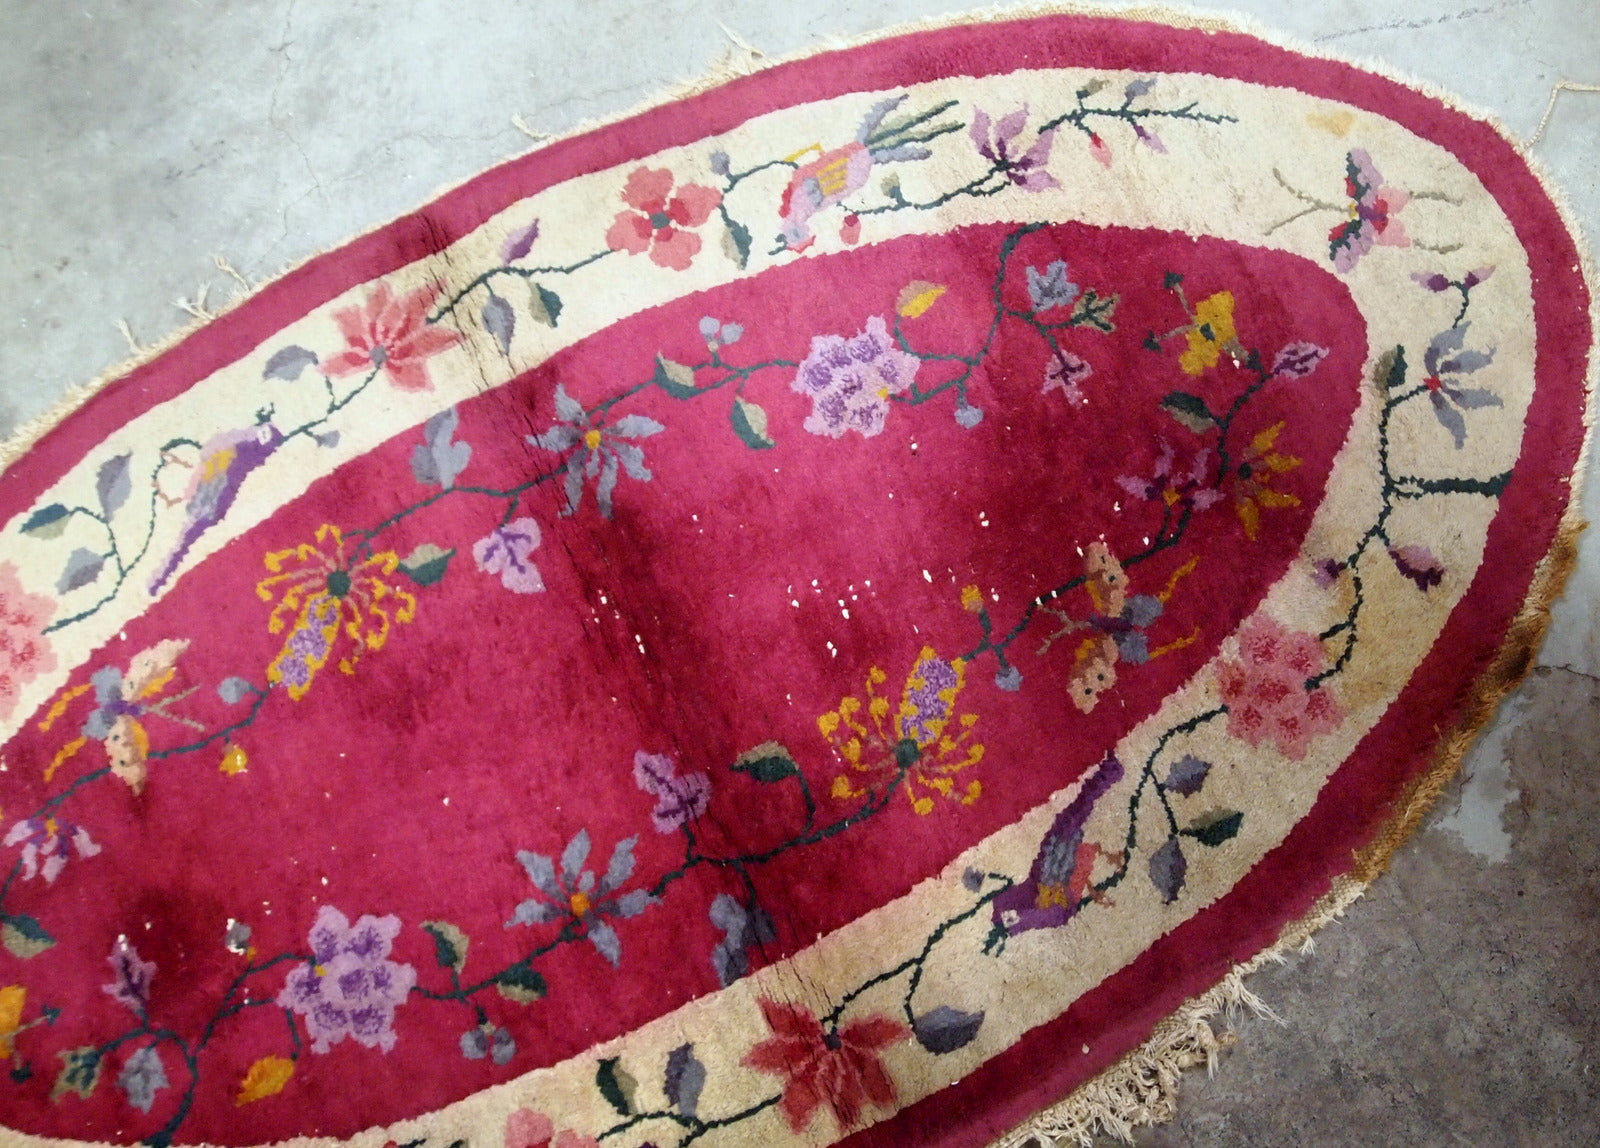 Antique Art Deco Chinese rug in original condition, it has full pile but a stain on the fringes. It is from the beginning of 20th century.